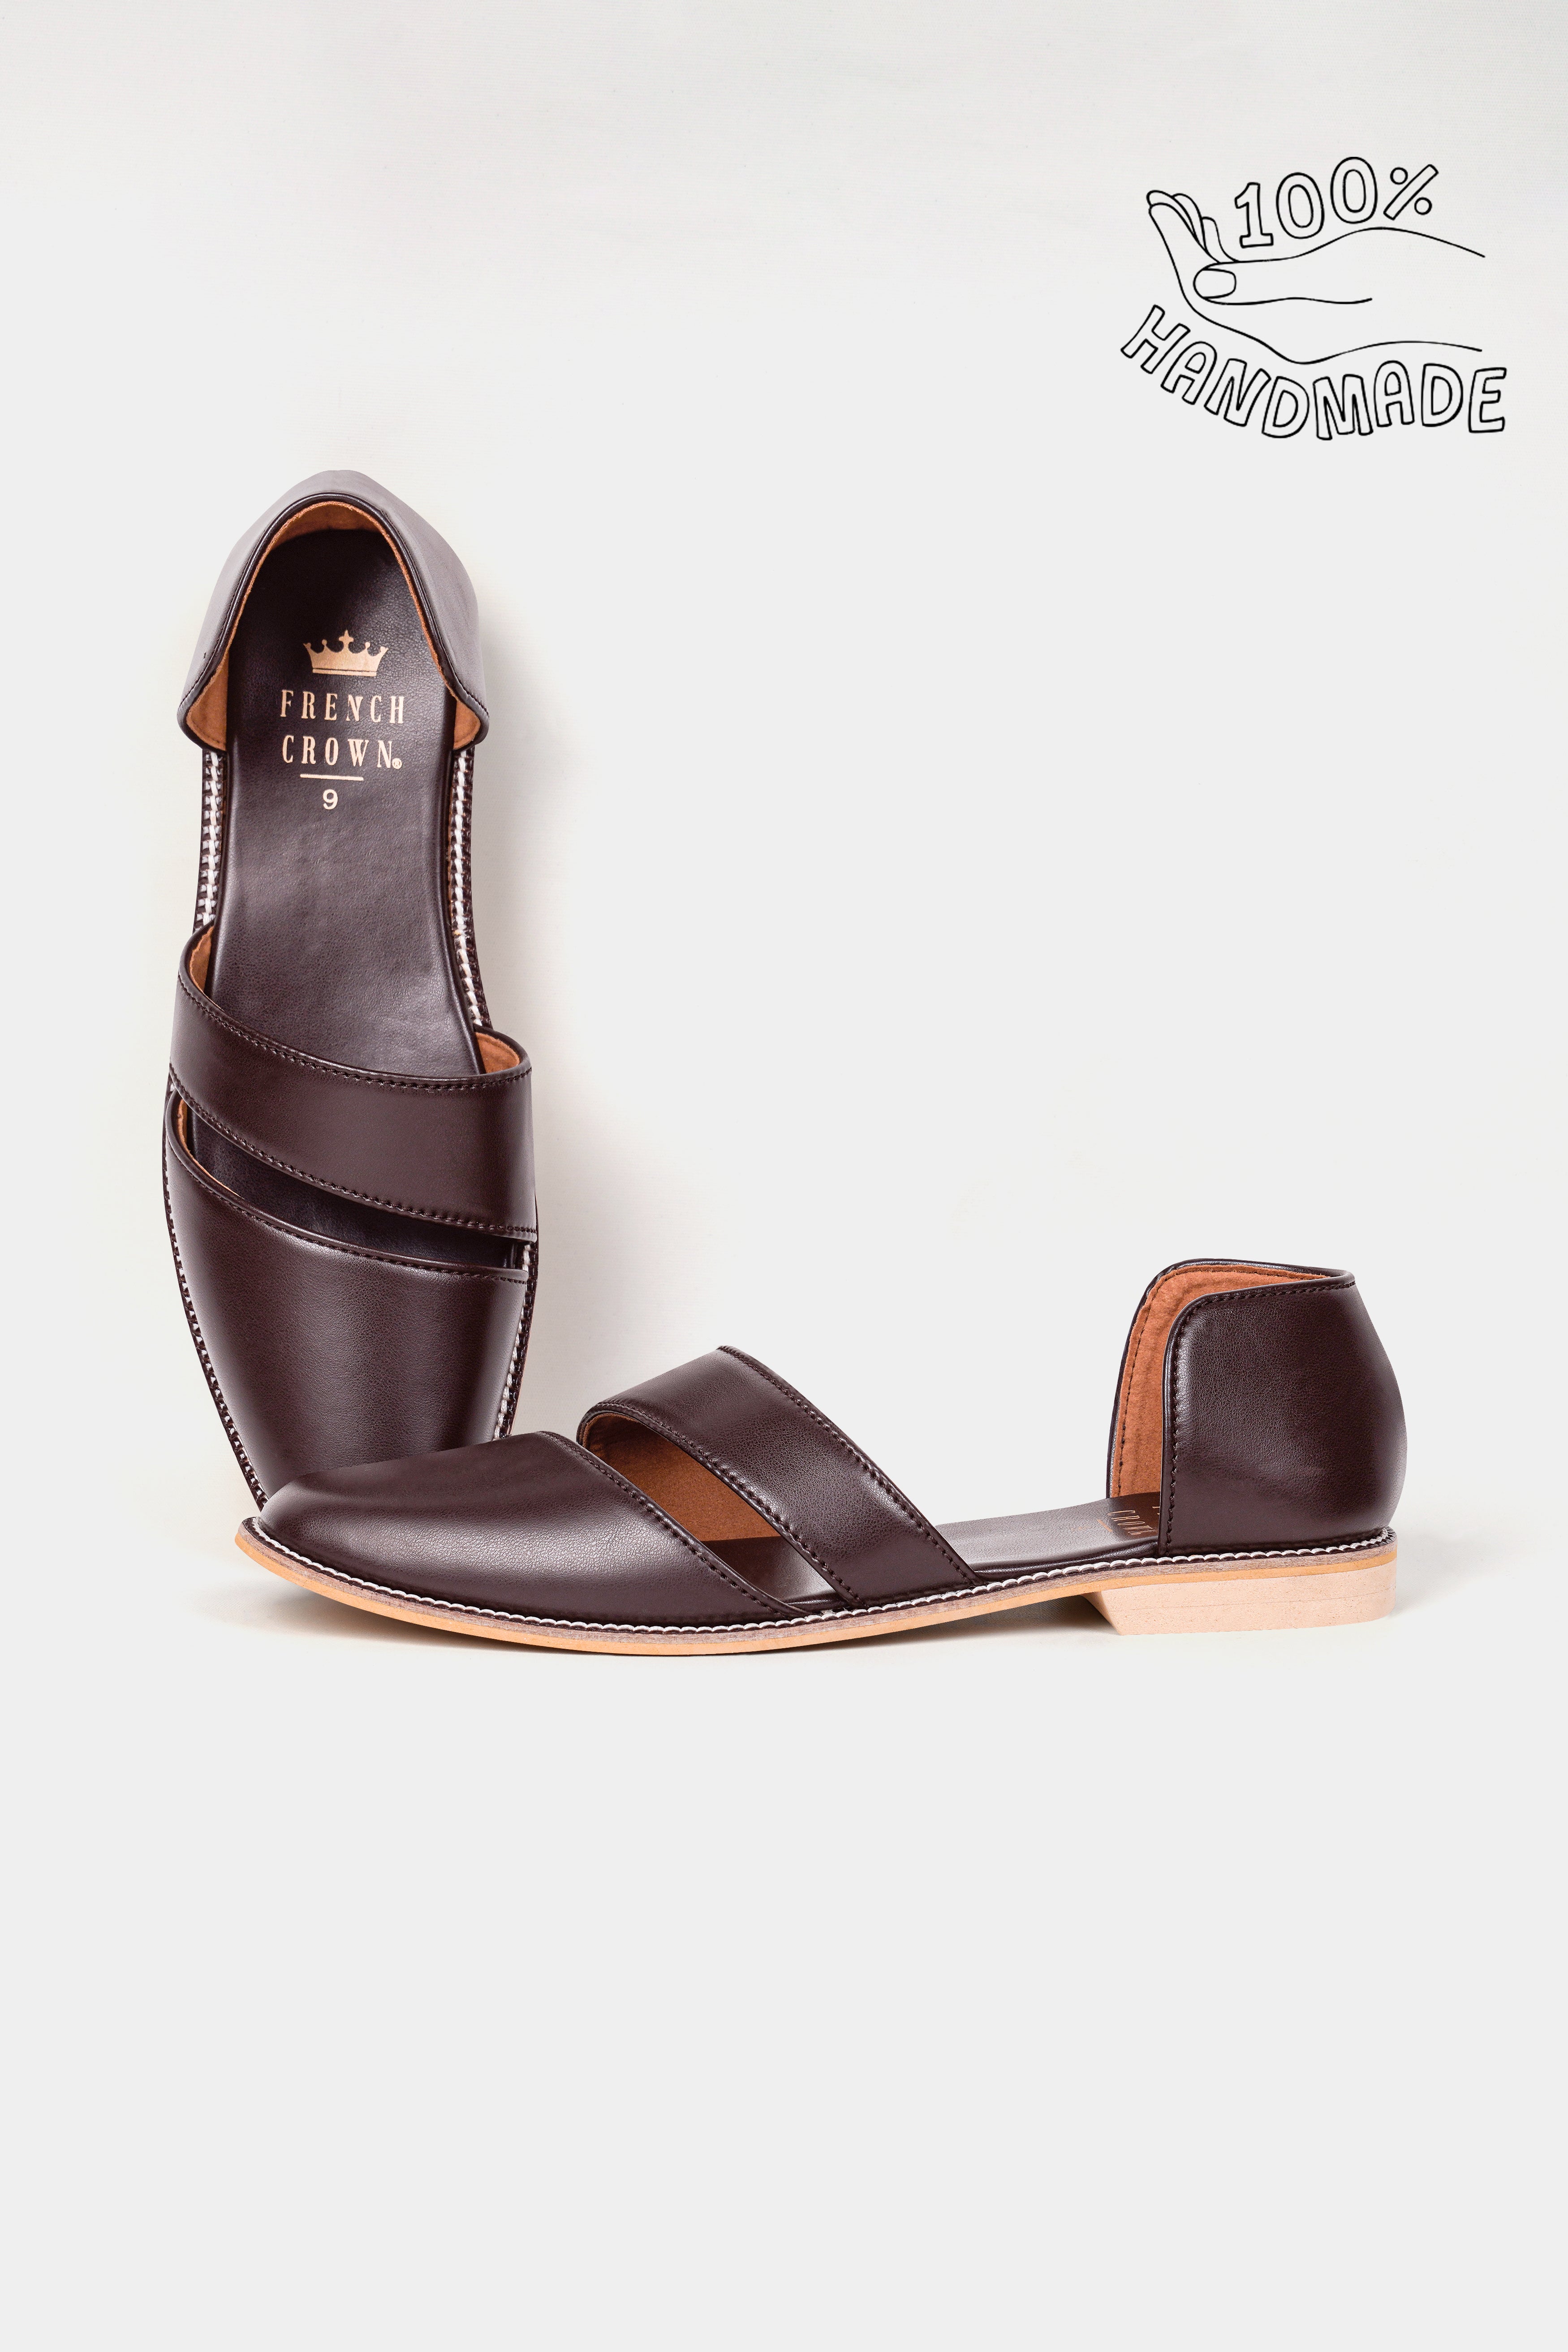 Dark Brown Vegan Leather Hand Stitched Pathanis Sandal FT131-6, FT131-7, FT131-8, FT131-9, FT131-10, FT131-11